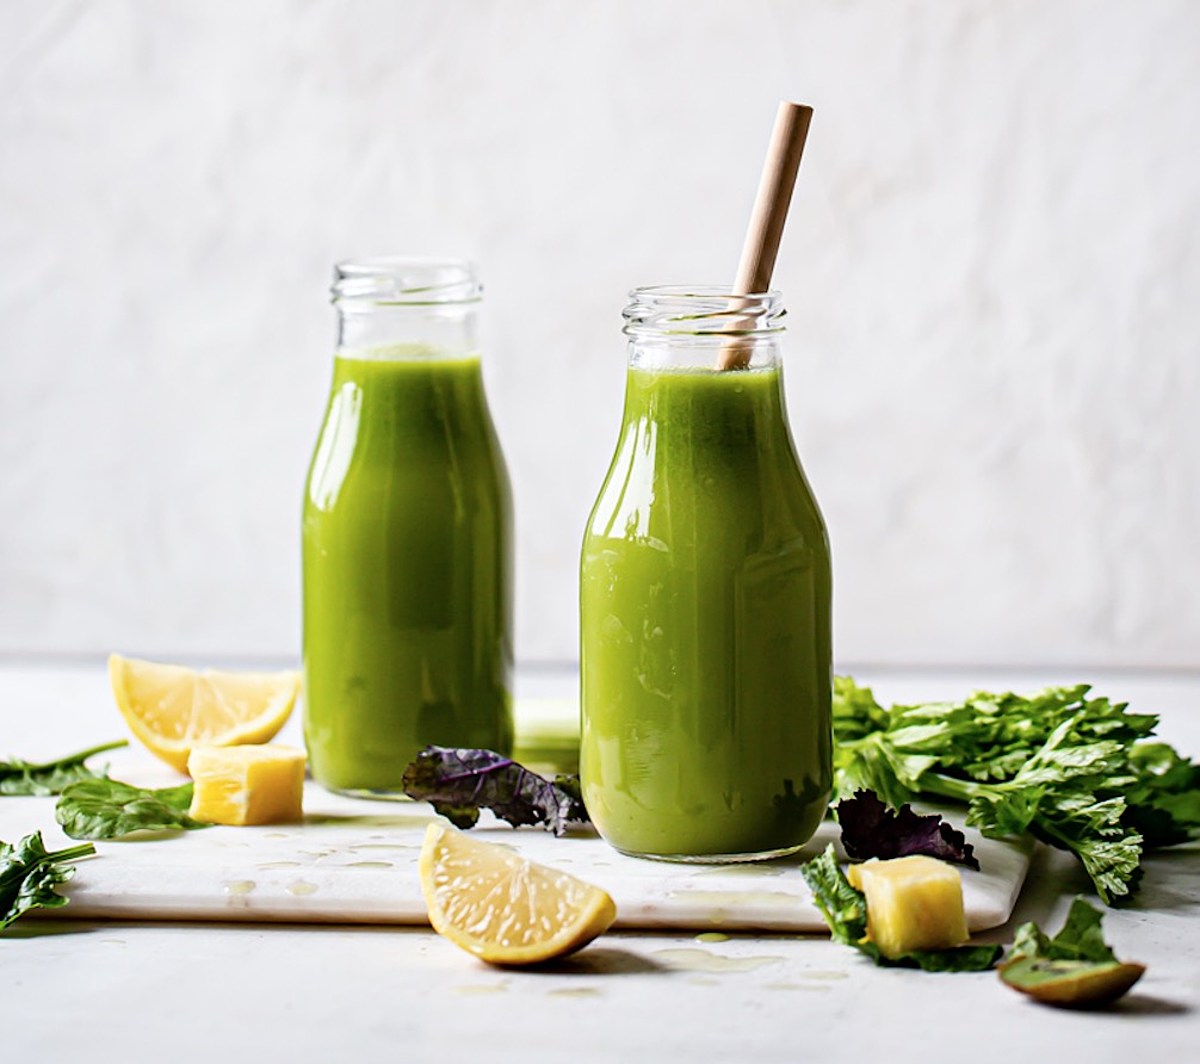 The Best Way to Start Your Day is With a Healthy Immune-Boosting Green